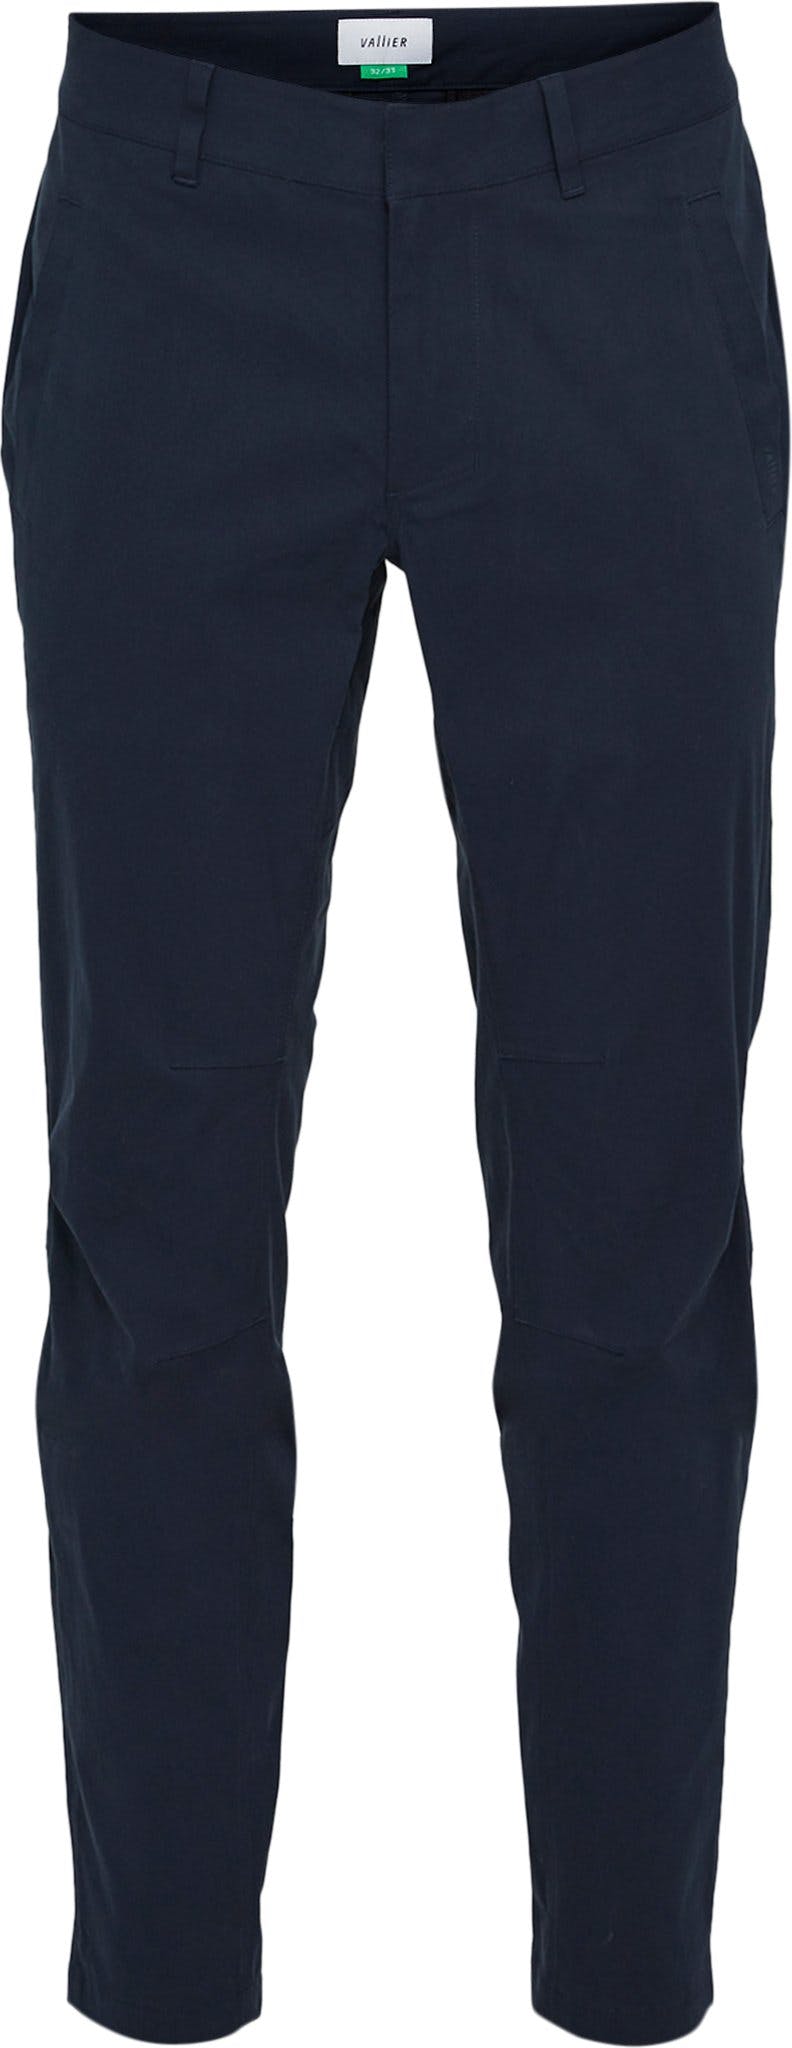 Product image for Leknes Articulated Pants - Men's